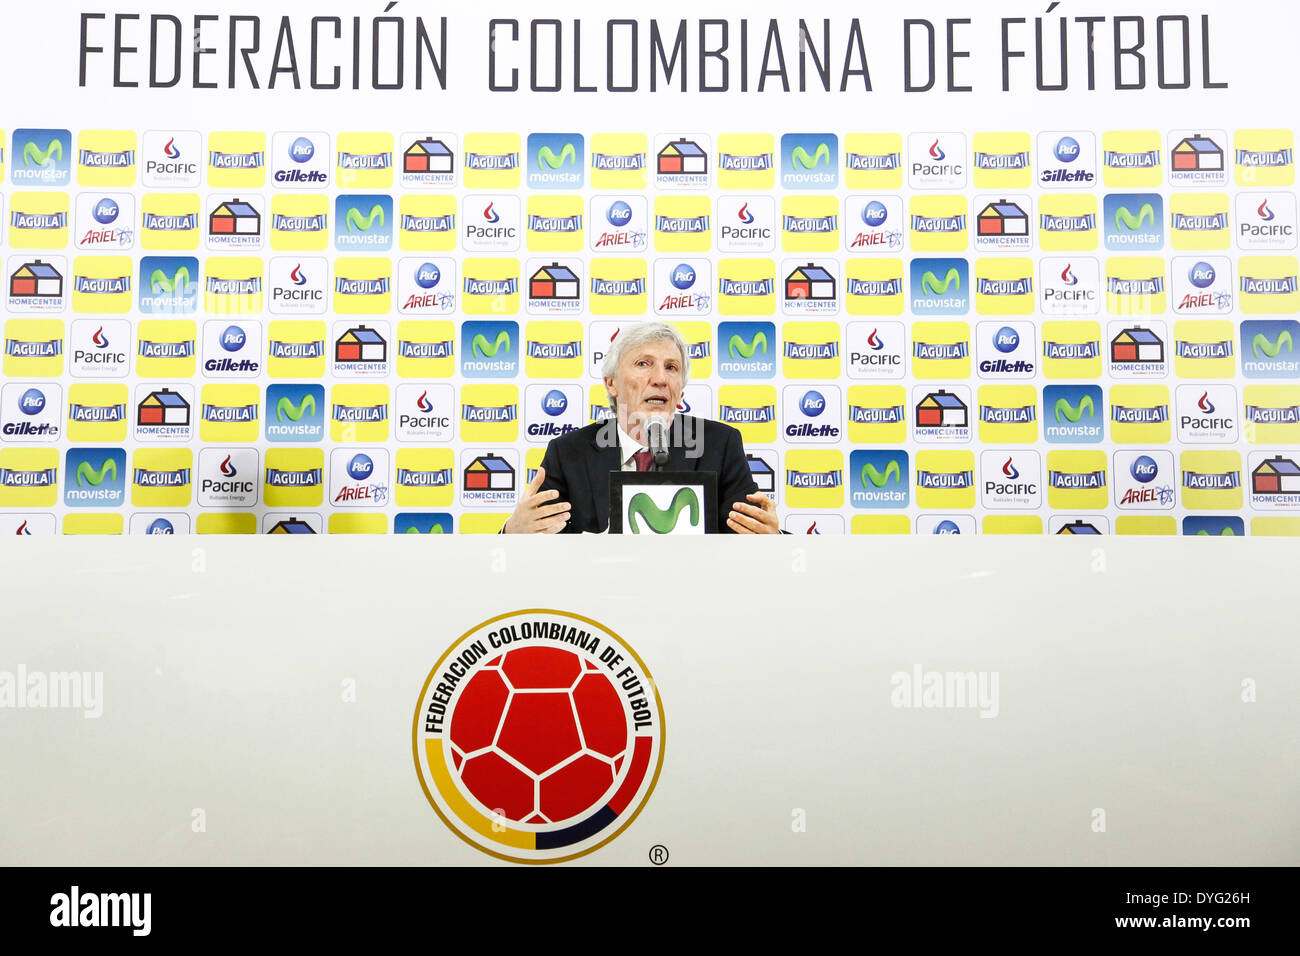 Bogota, Colombia. 16th Apr, 2014. Colombia's national soccer team head coach Jose Pekerman participates in a press conference in Bogota, Colombia, on April 16, 2014. Pekerman presented his latest movements on the Colombian team before the Brazil 2014 World Cup and announced that Colombia will play two friendly matches in Argentina, according to local press. © Jhon Paz/Xinhua/Alamy Live News Stock Photo